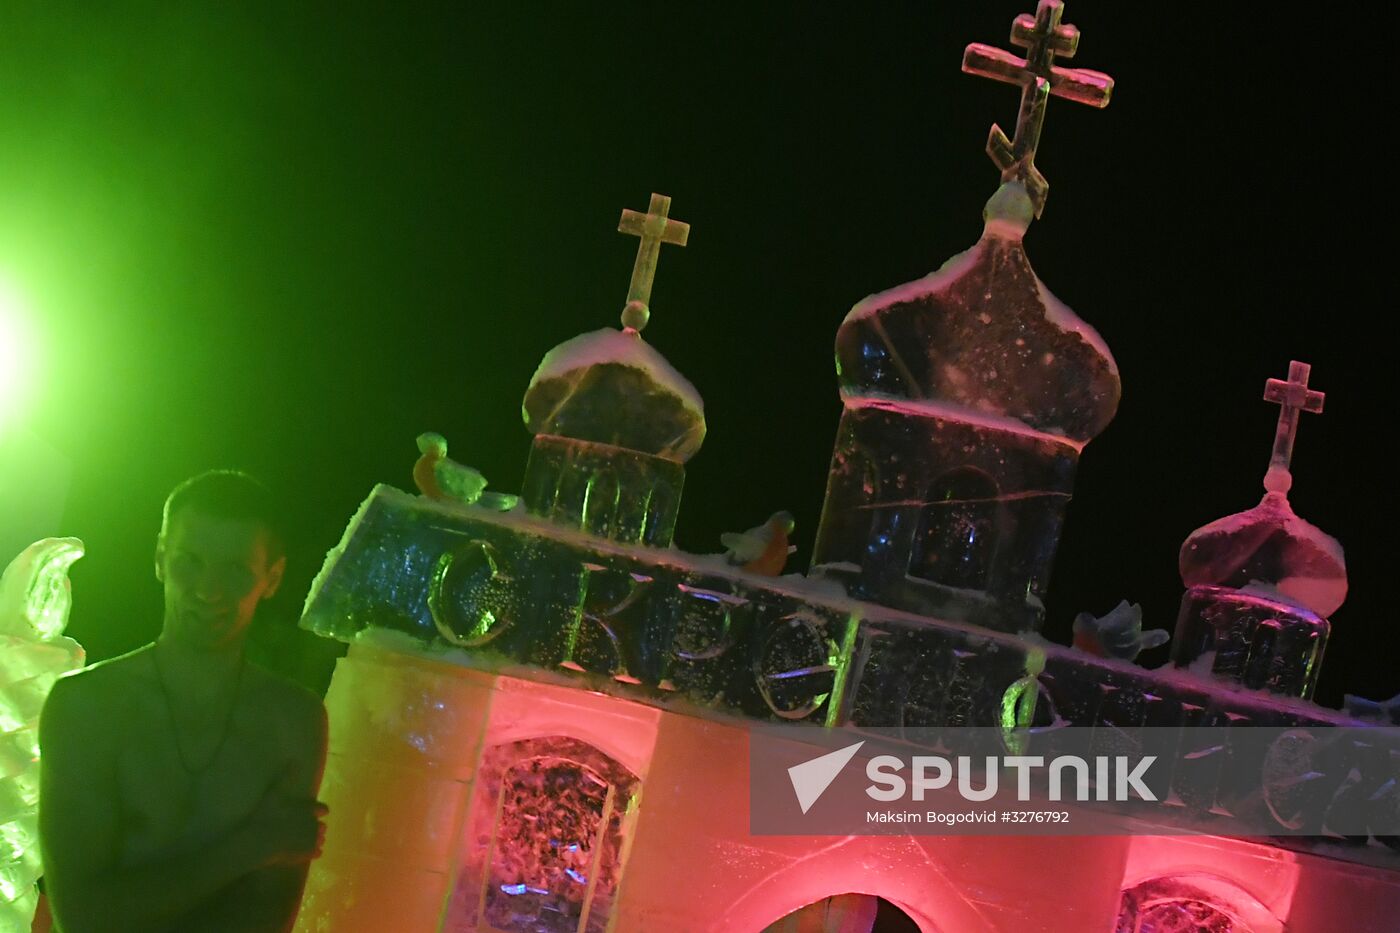 Orthodox Epiphany celebration in Russian cities